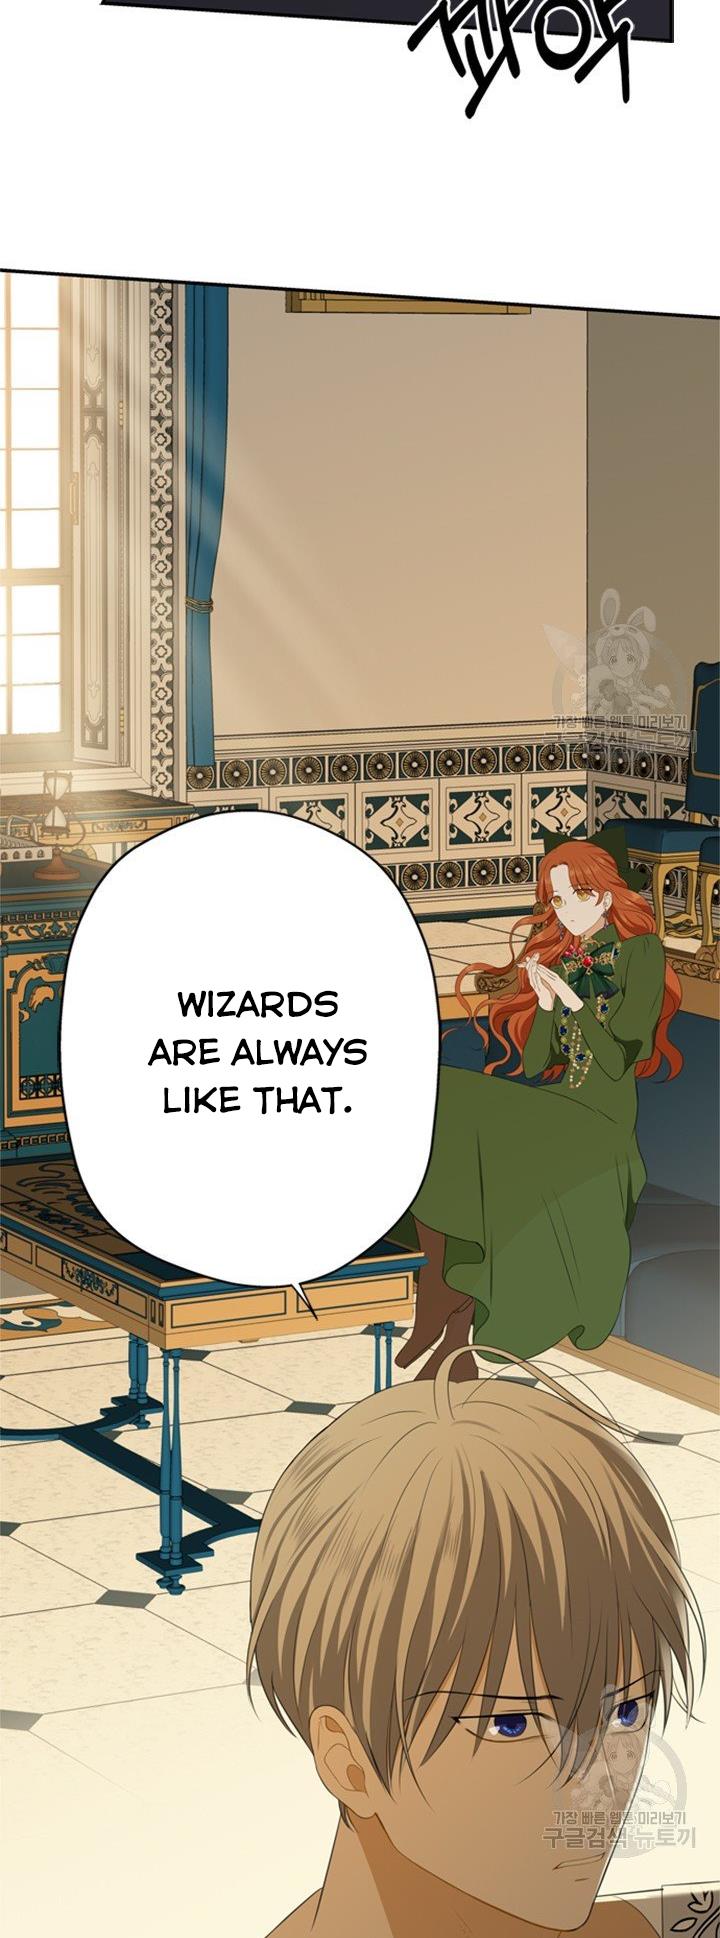 The Wizard is Poor chapter 3